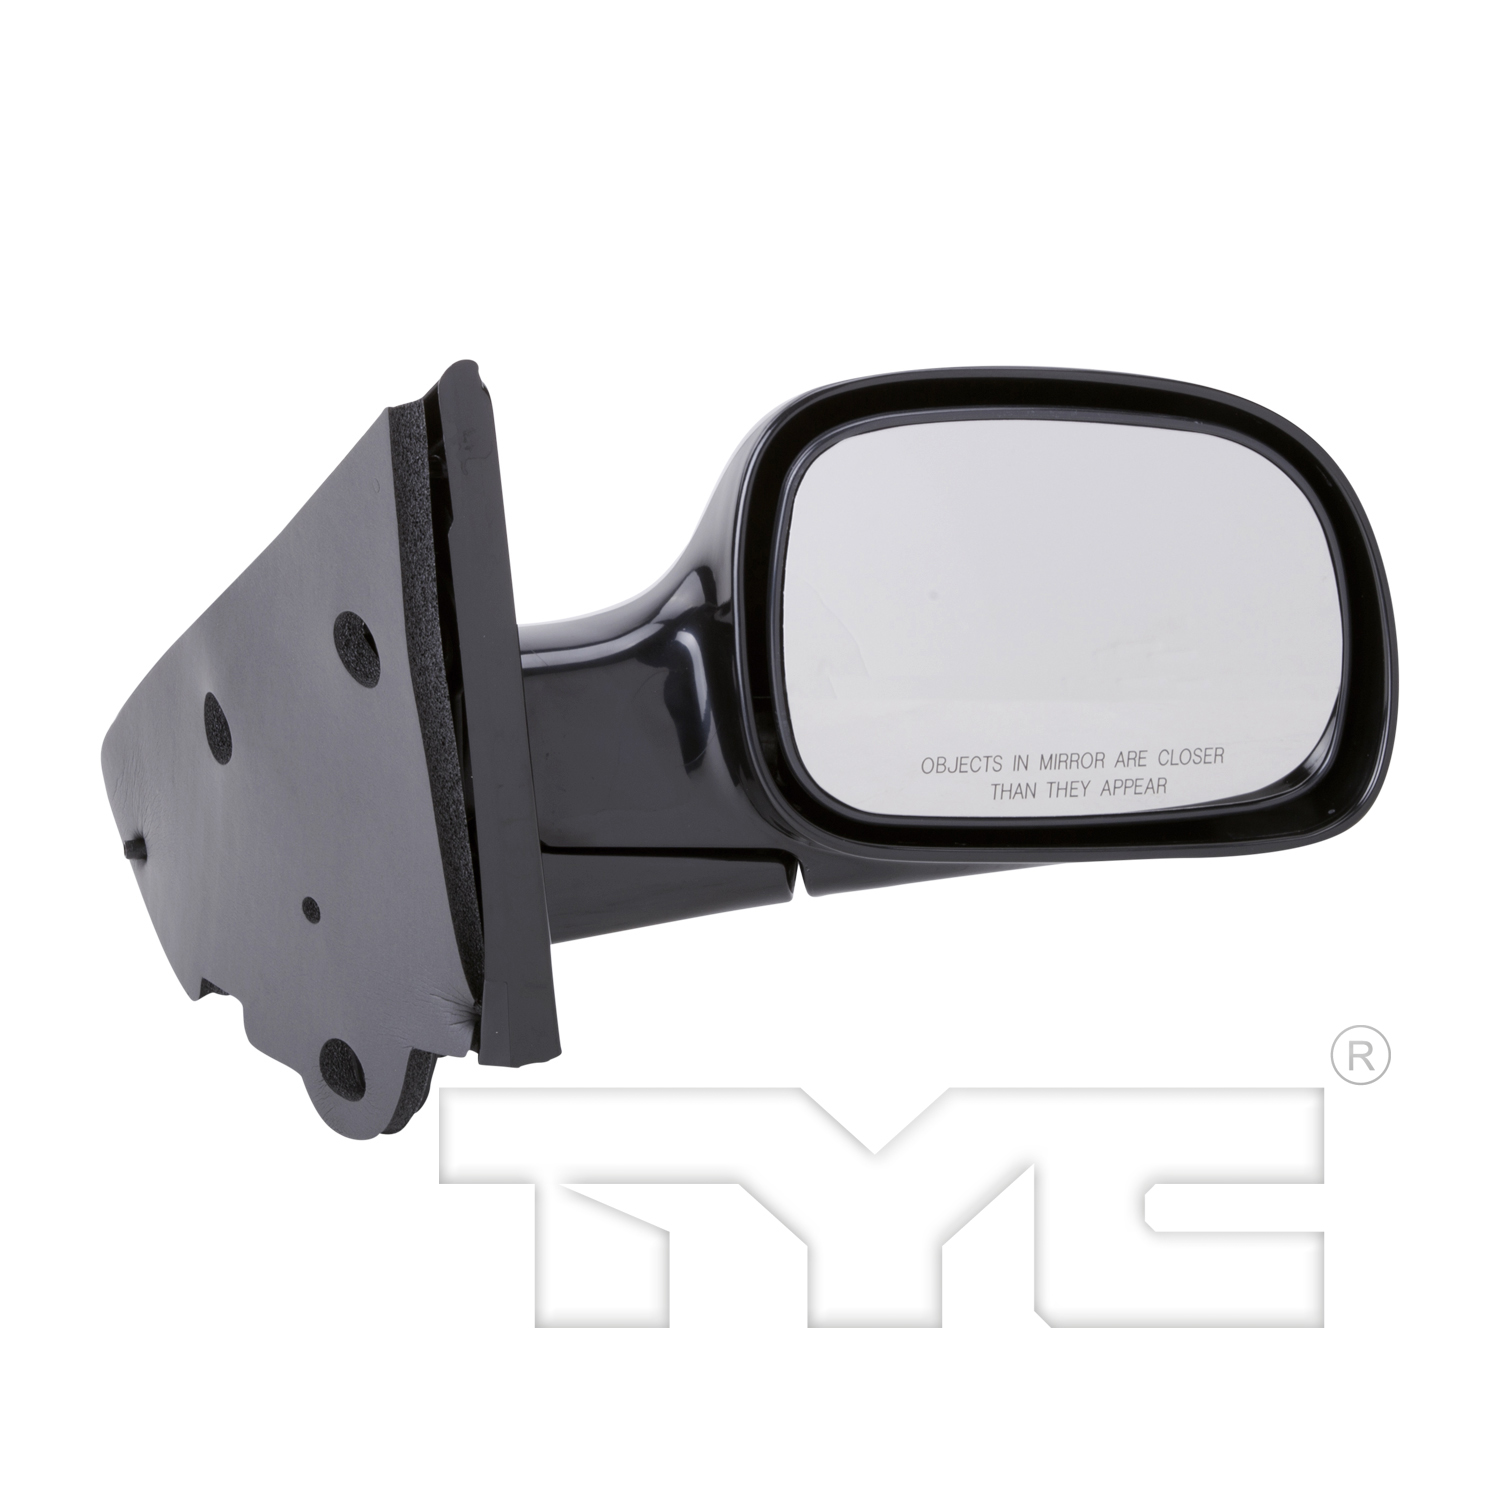 Aftermarket MIRRORS for CHRYSLER - TOWN & COUNTRY, TOWN & COUNTRY,01-07,RT Mirror outside rear view